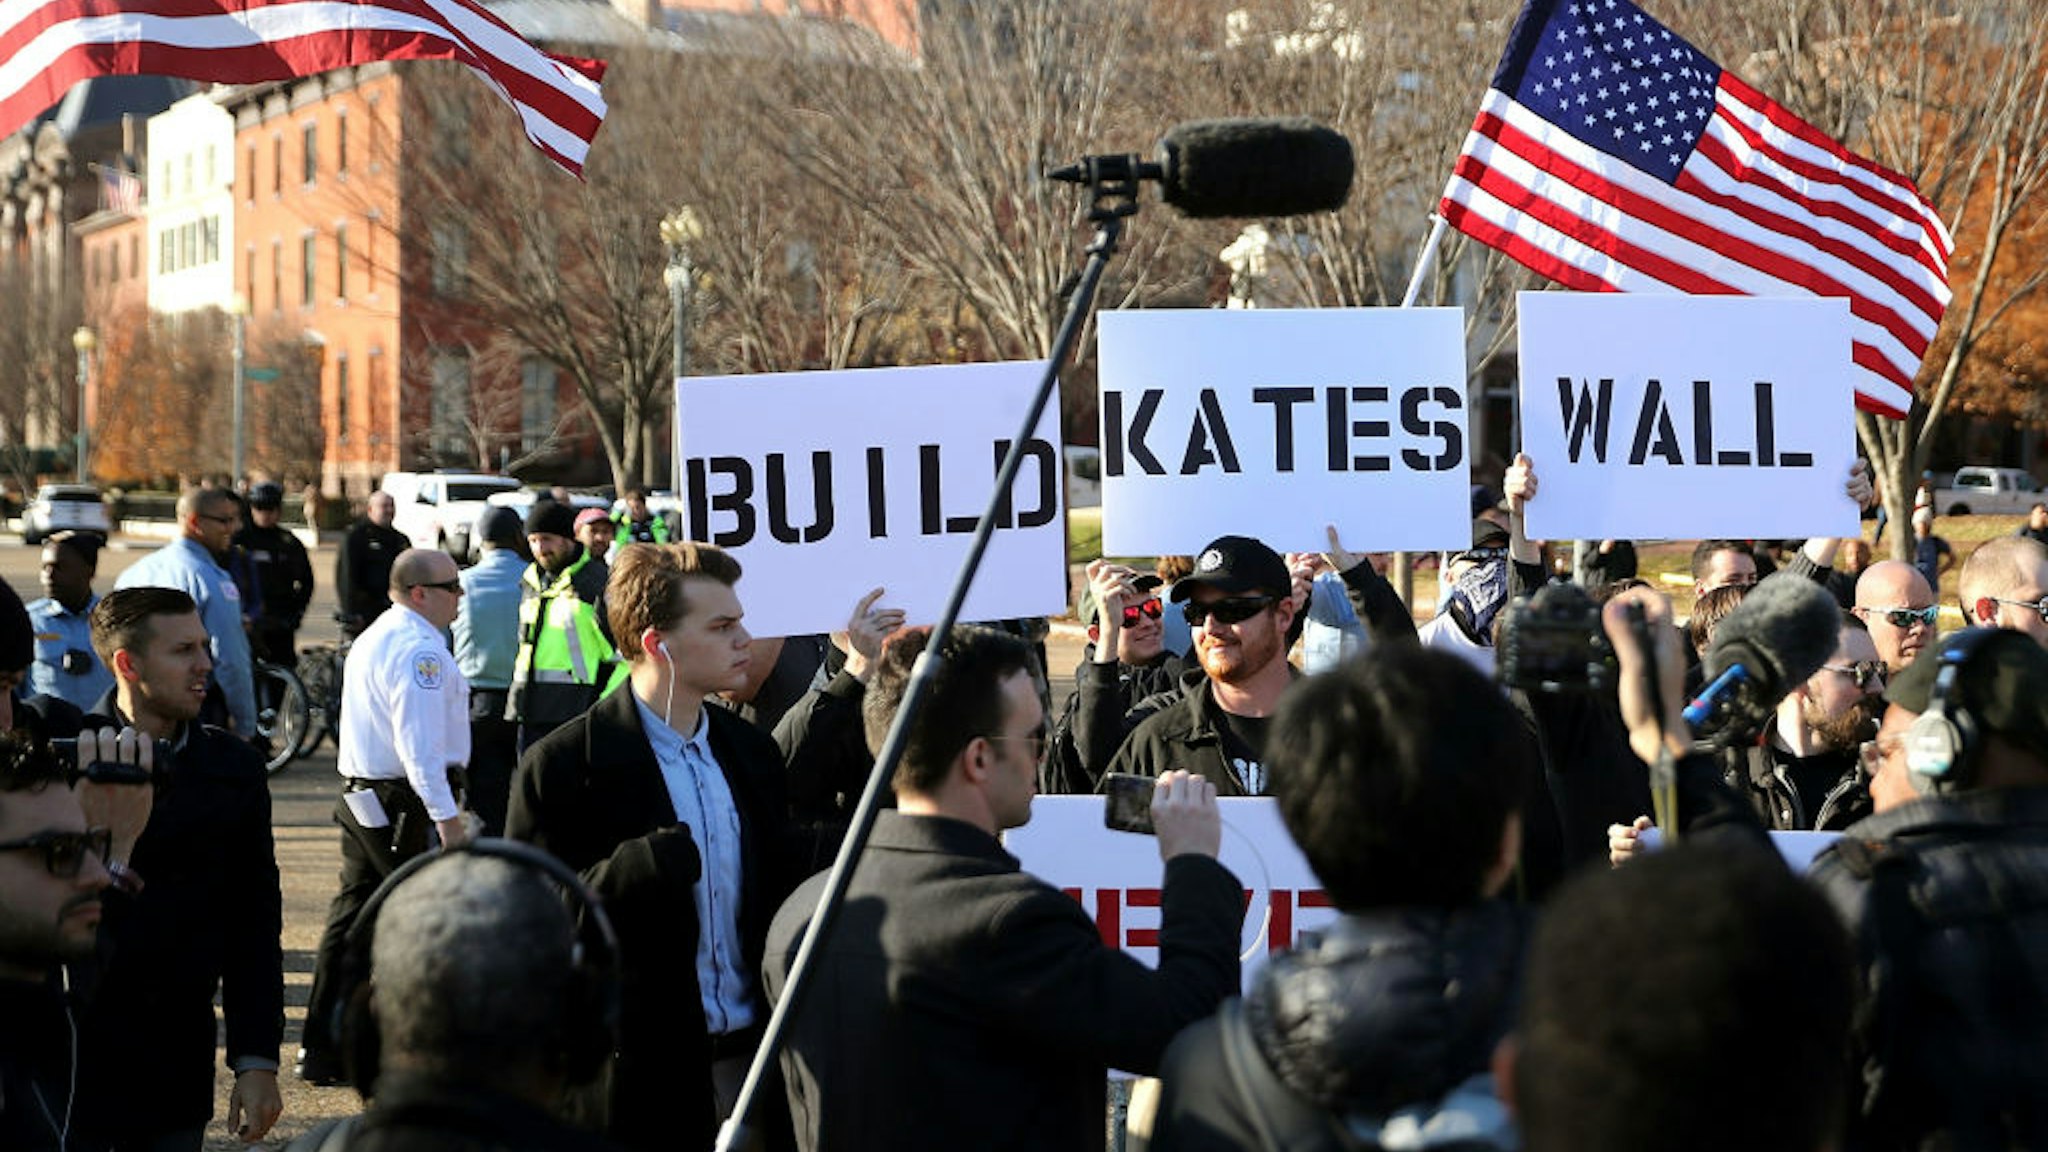 WASHINGTON, DC - DECEMBER 03: A phalanx of Metropolitan Police Department officers create a barrier around white nationalists and neo-Nazis as they rally in front of the White House December 3, 2017 in Washington, DC. The facists held an anti-immigration rally in response to this week's acquittal of an undocumented Mexican immigrant in the 2015 shooting death of Kate Steinle in San Francisco. (Photo by Chip Somodevilla/Getty Images)